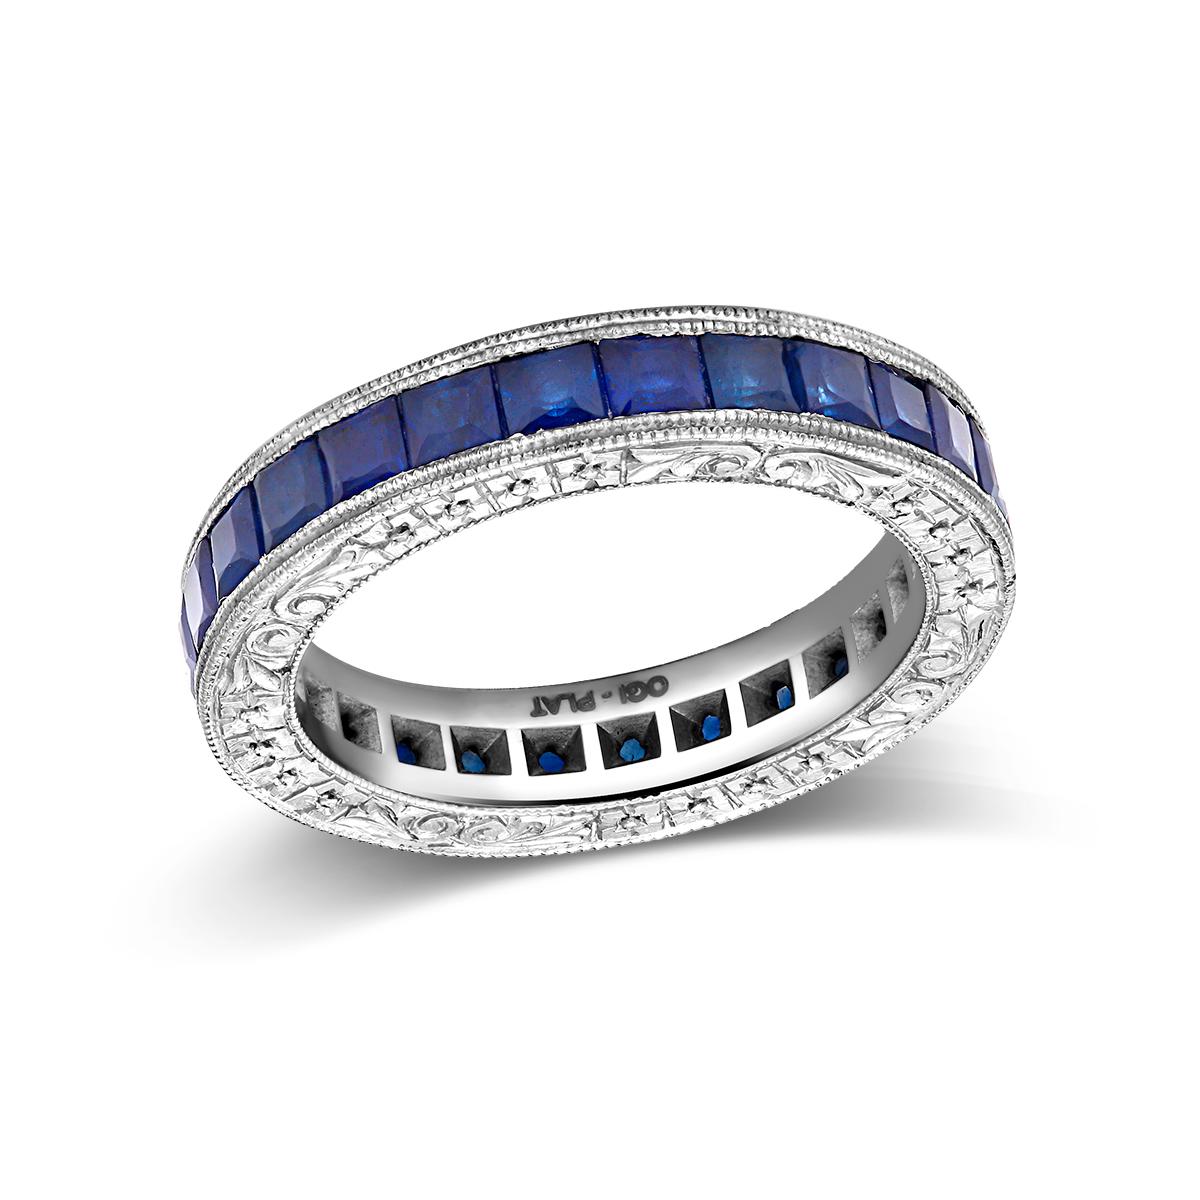 Contemporary Platinum Square Sapphire Eternity Band with Old Master Engraving